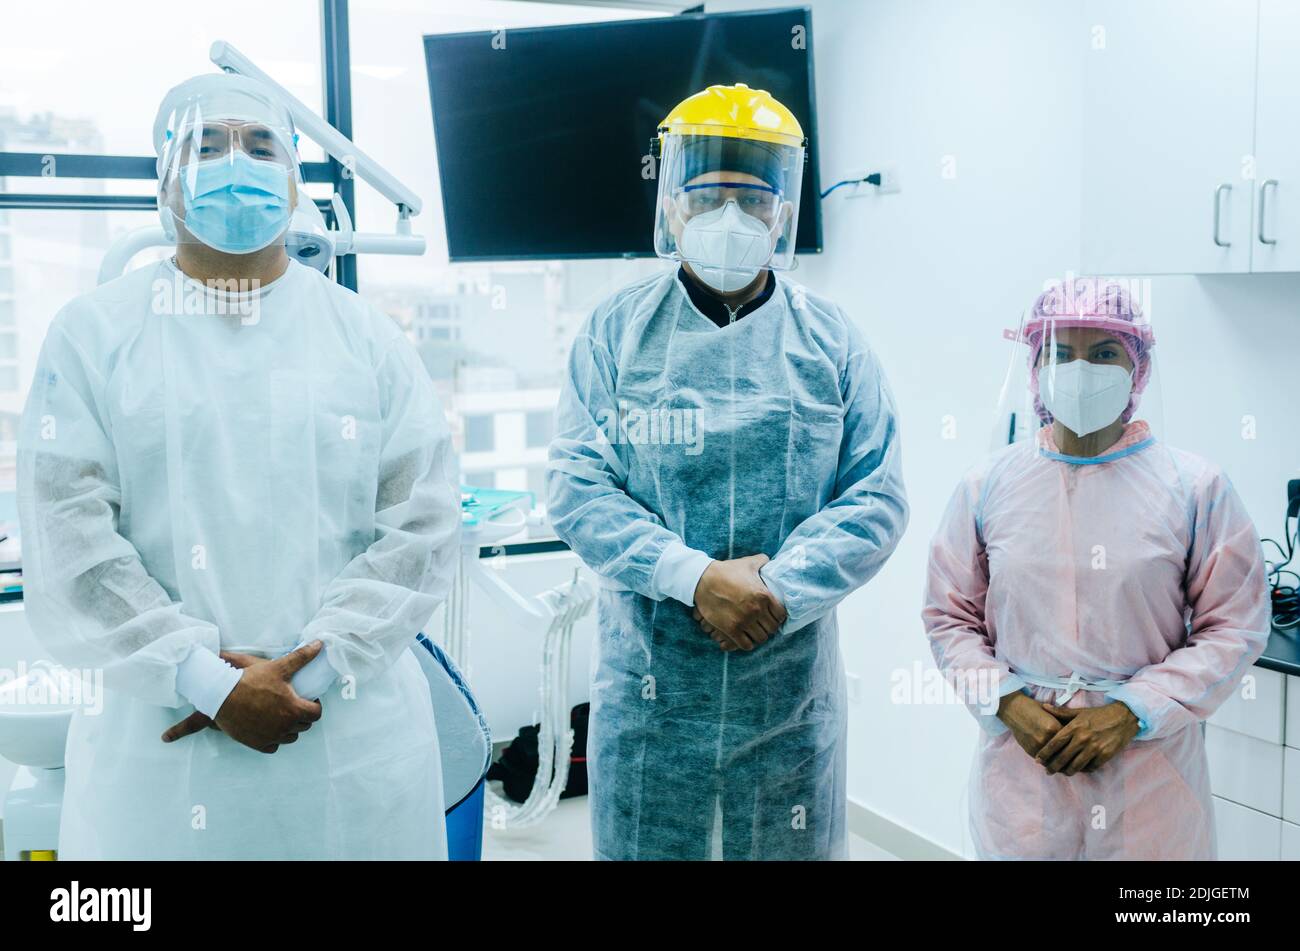 A group of doctors in protective suit against the virus Stock Photo